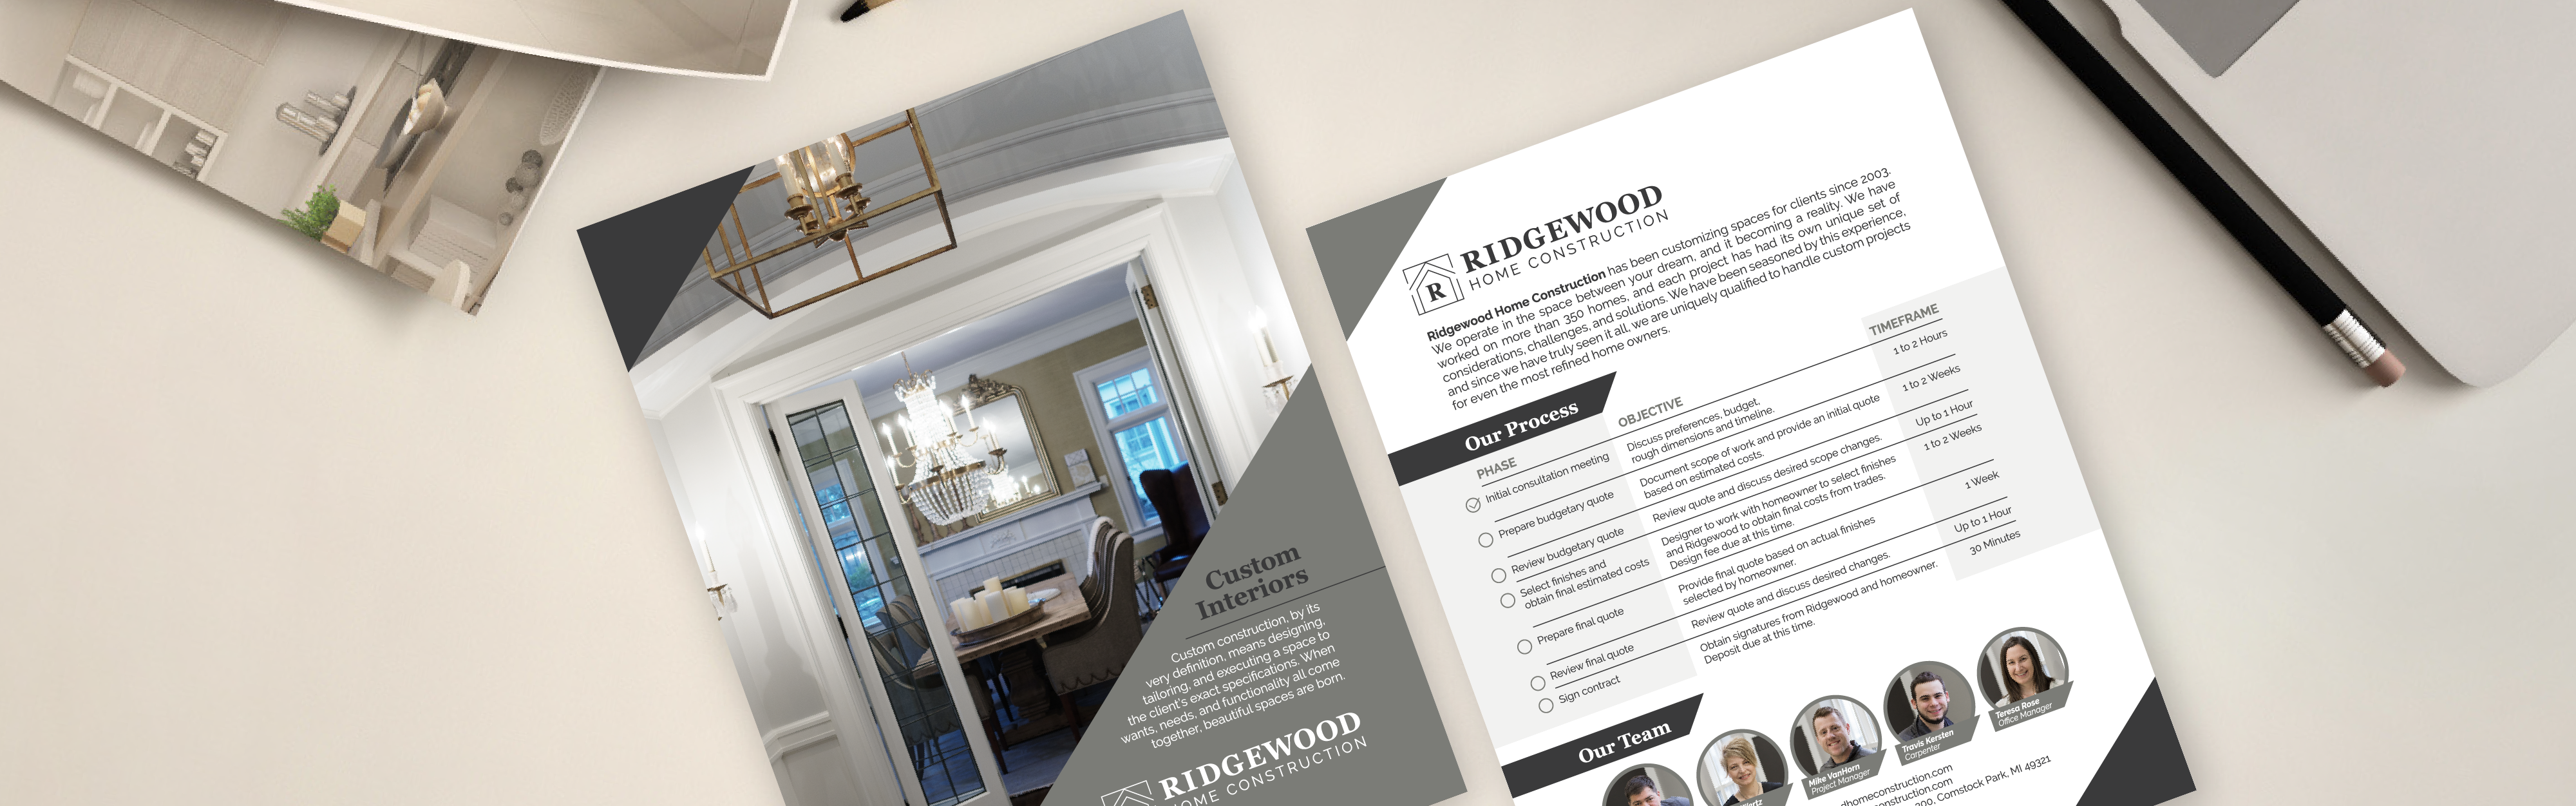 Real estate brochure featuring Ridgewood Home Construction property information and contact details for a team of agents, presented on a desk with a pen and glasses.